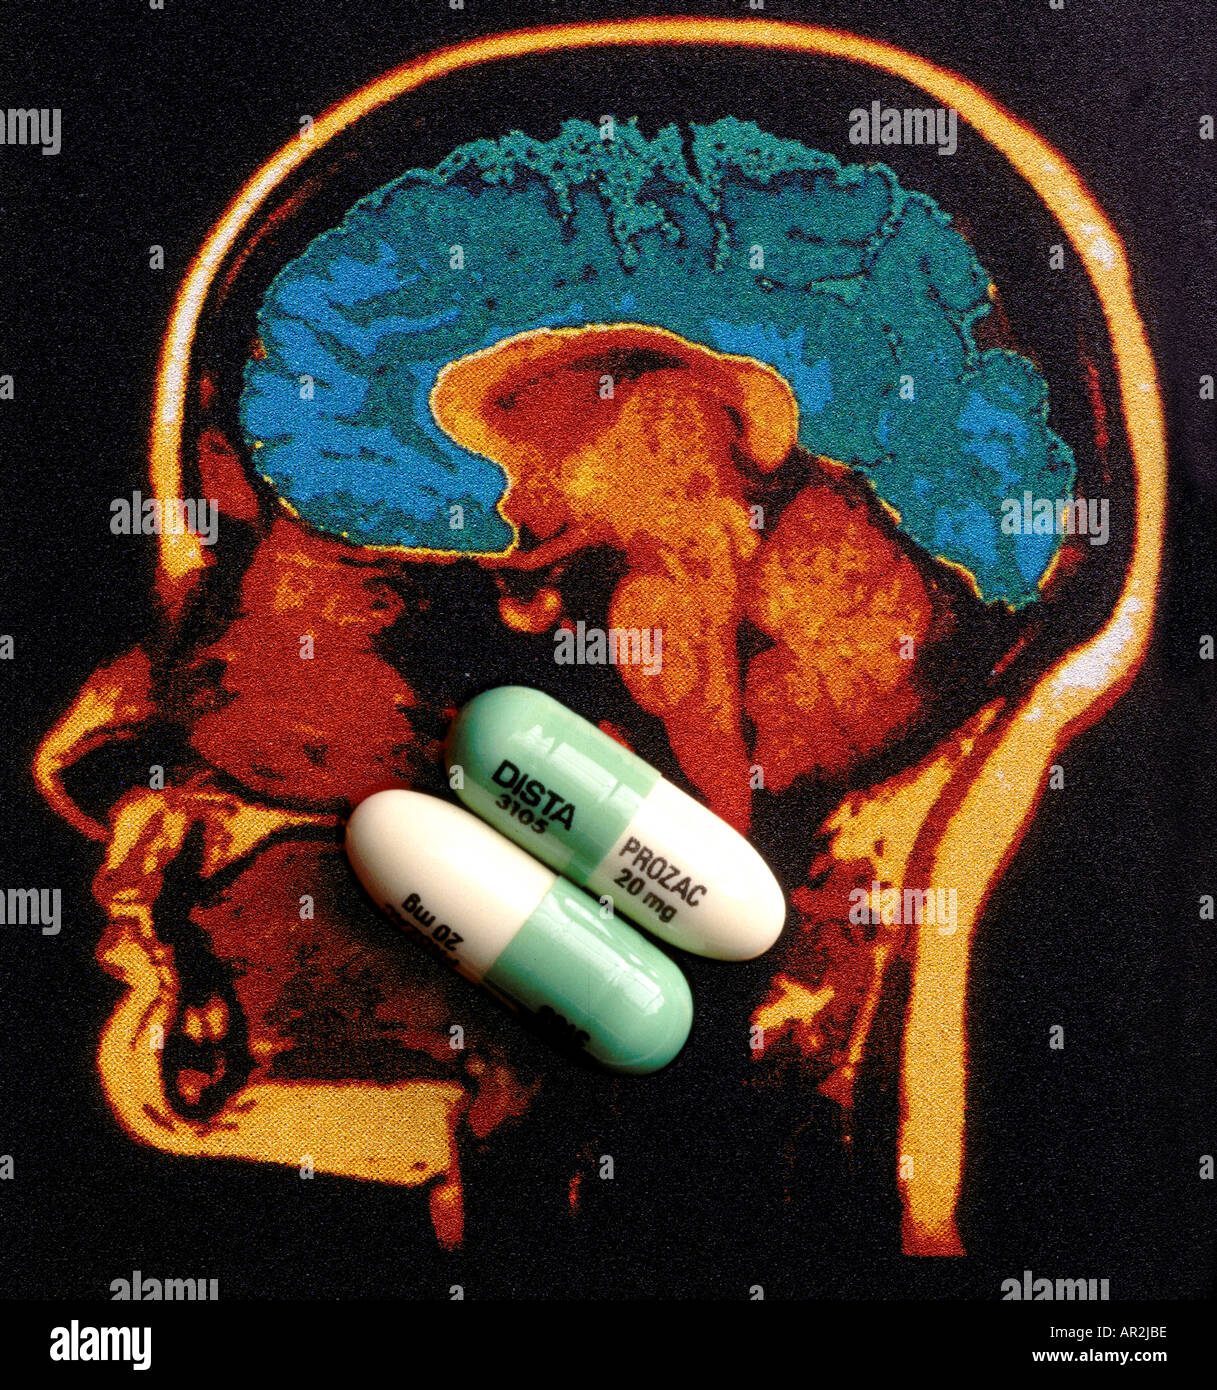 prozac 20 mg capsules produced by Dista superimposed on a scan of the human head and brain Stock Photo